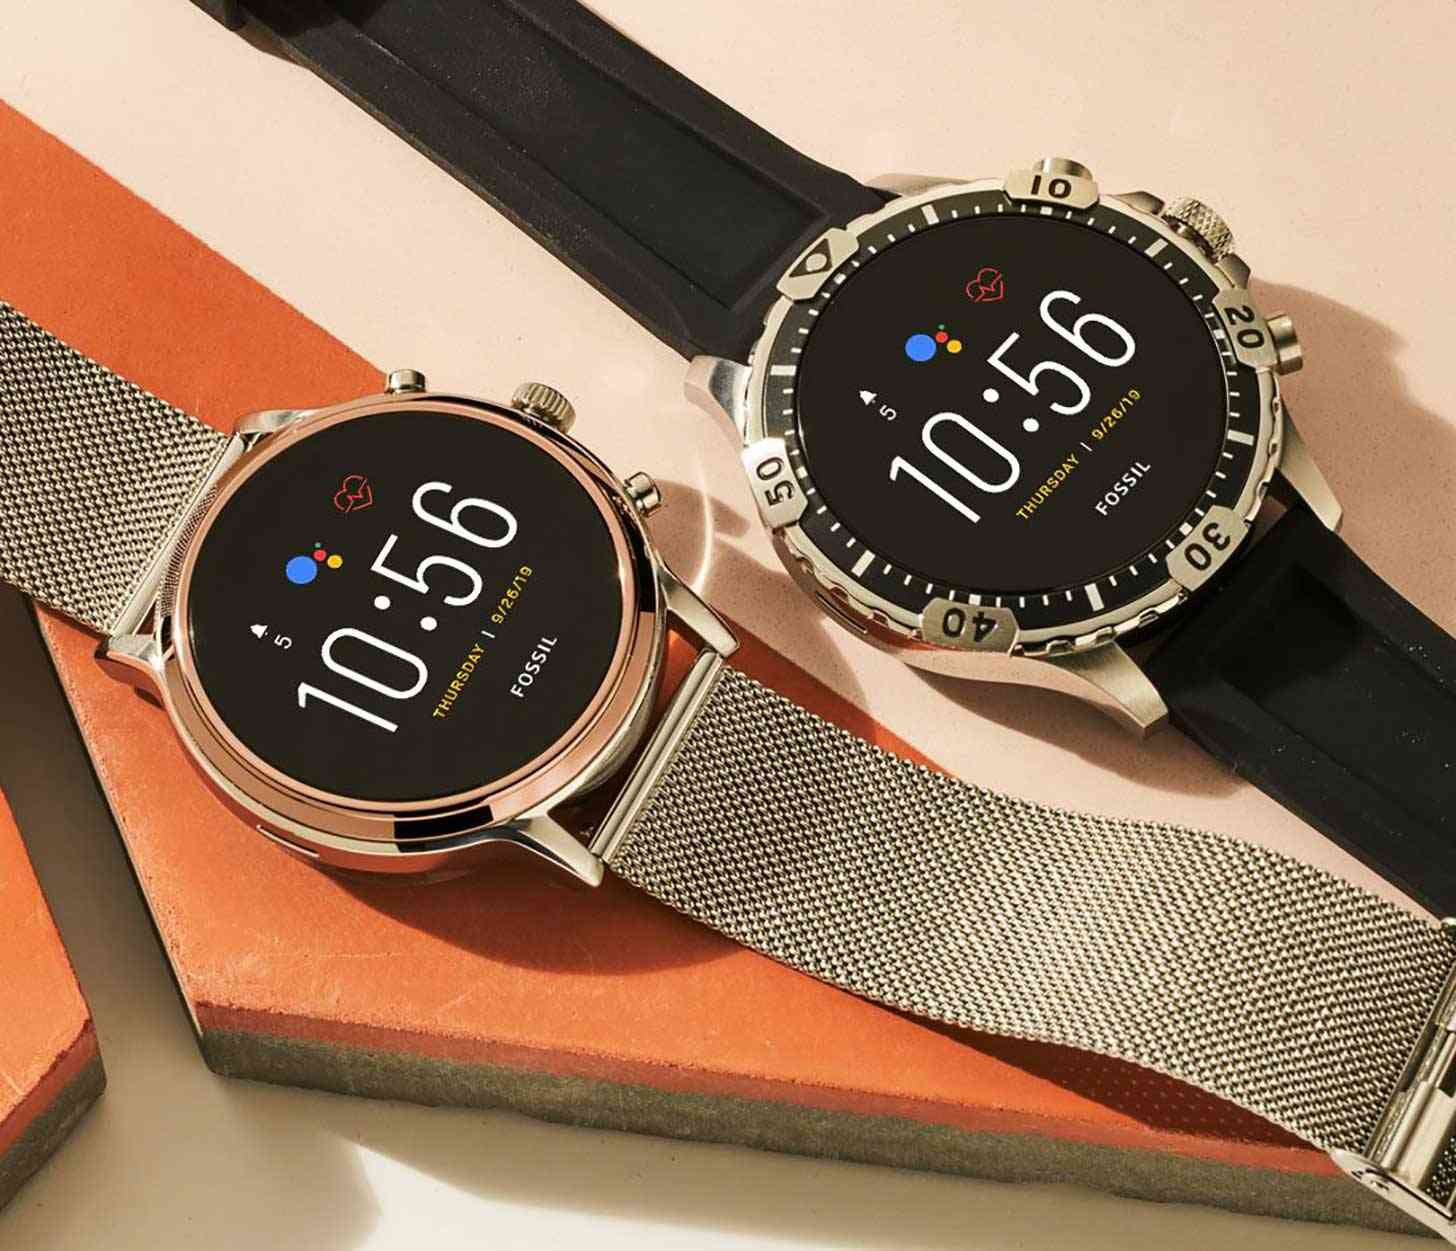 Fossil Gen 5 smartwatches get update with sleep tracking, new battery